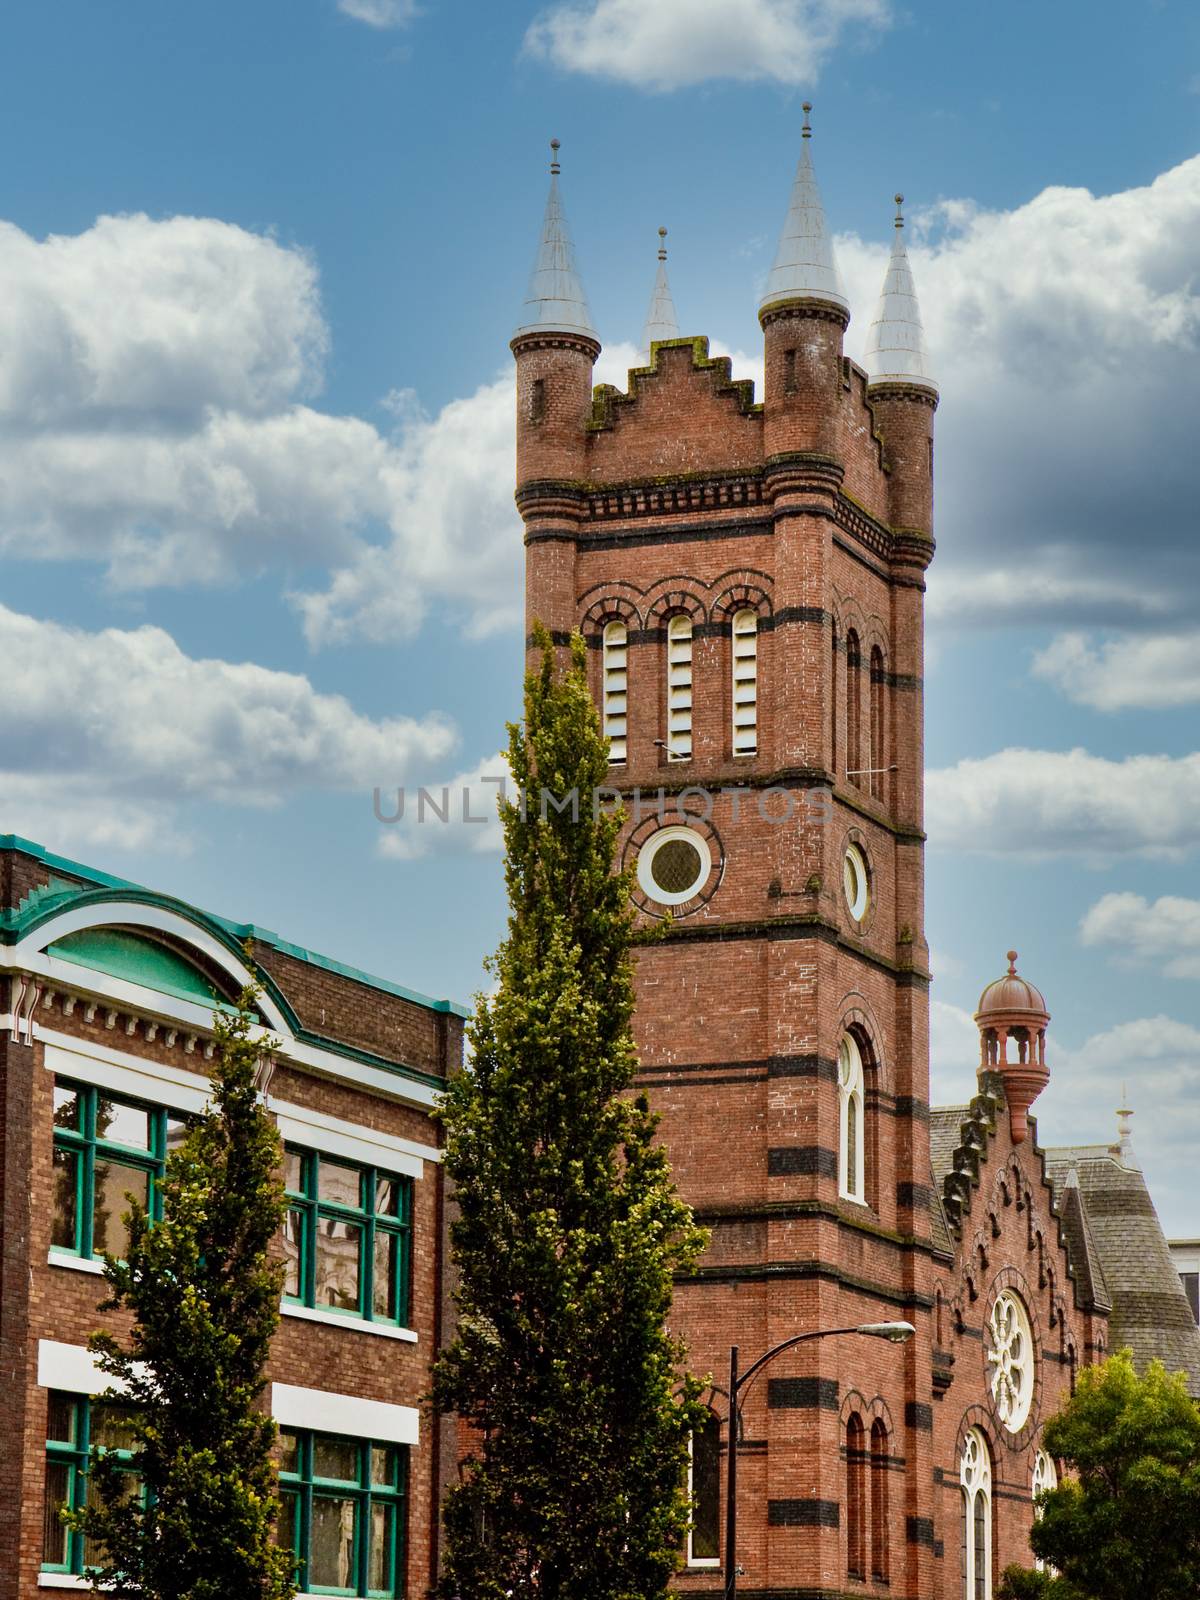 An old classic brick church tower on a blue background